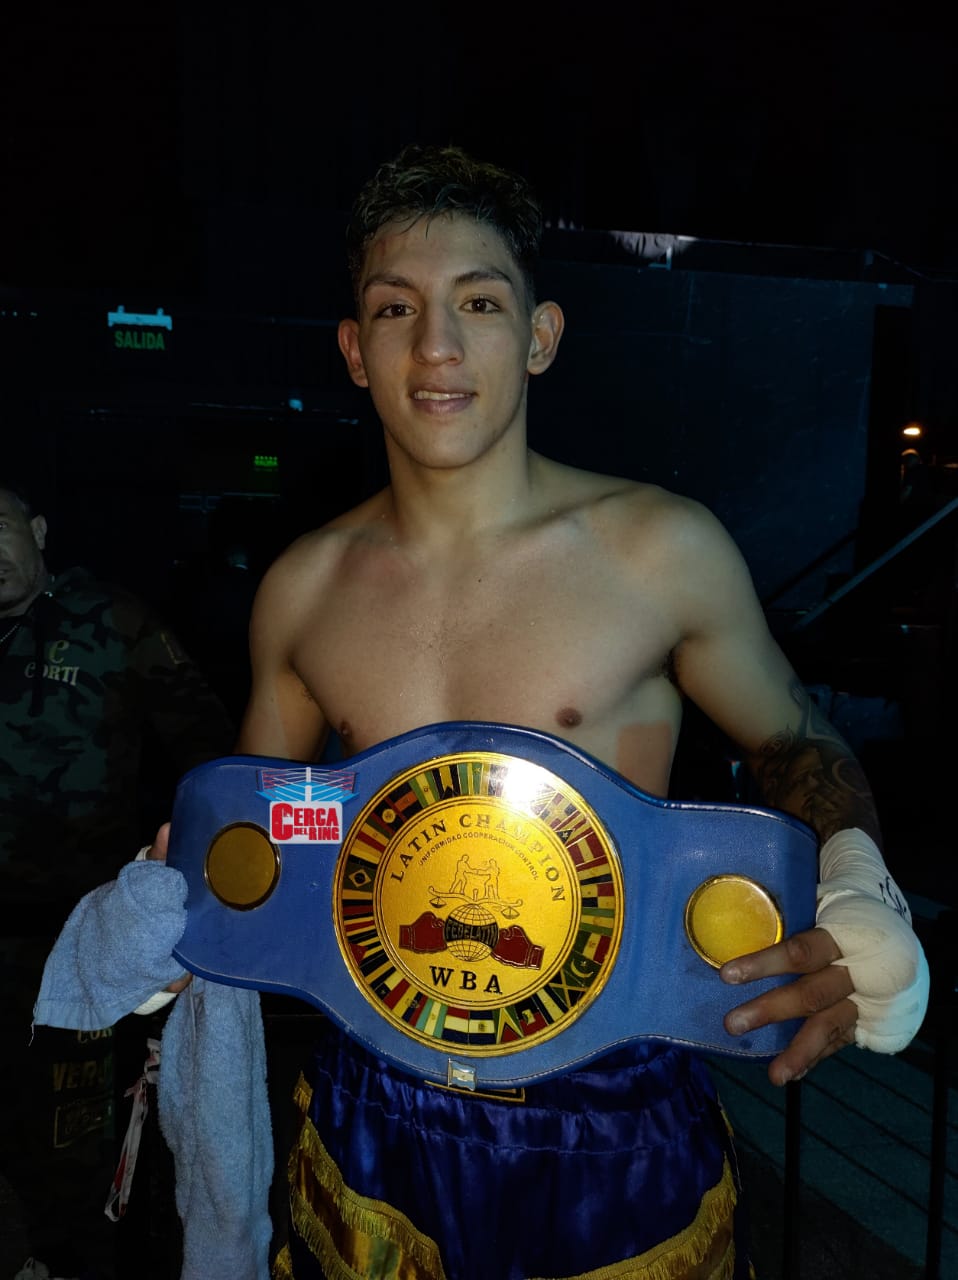 Corzo defends his Fedelatin belt against Brito in a duel of knockout stars